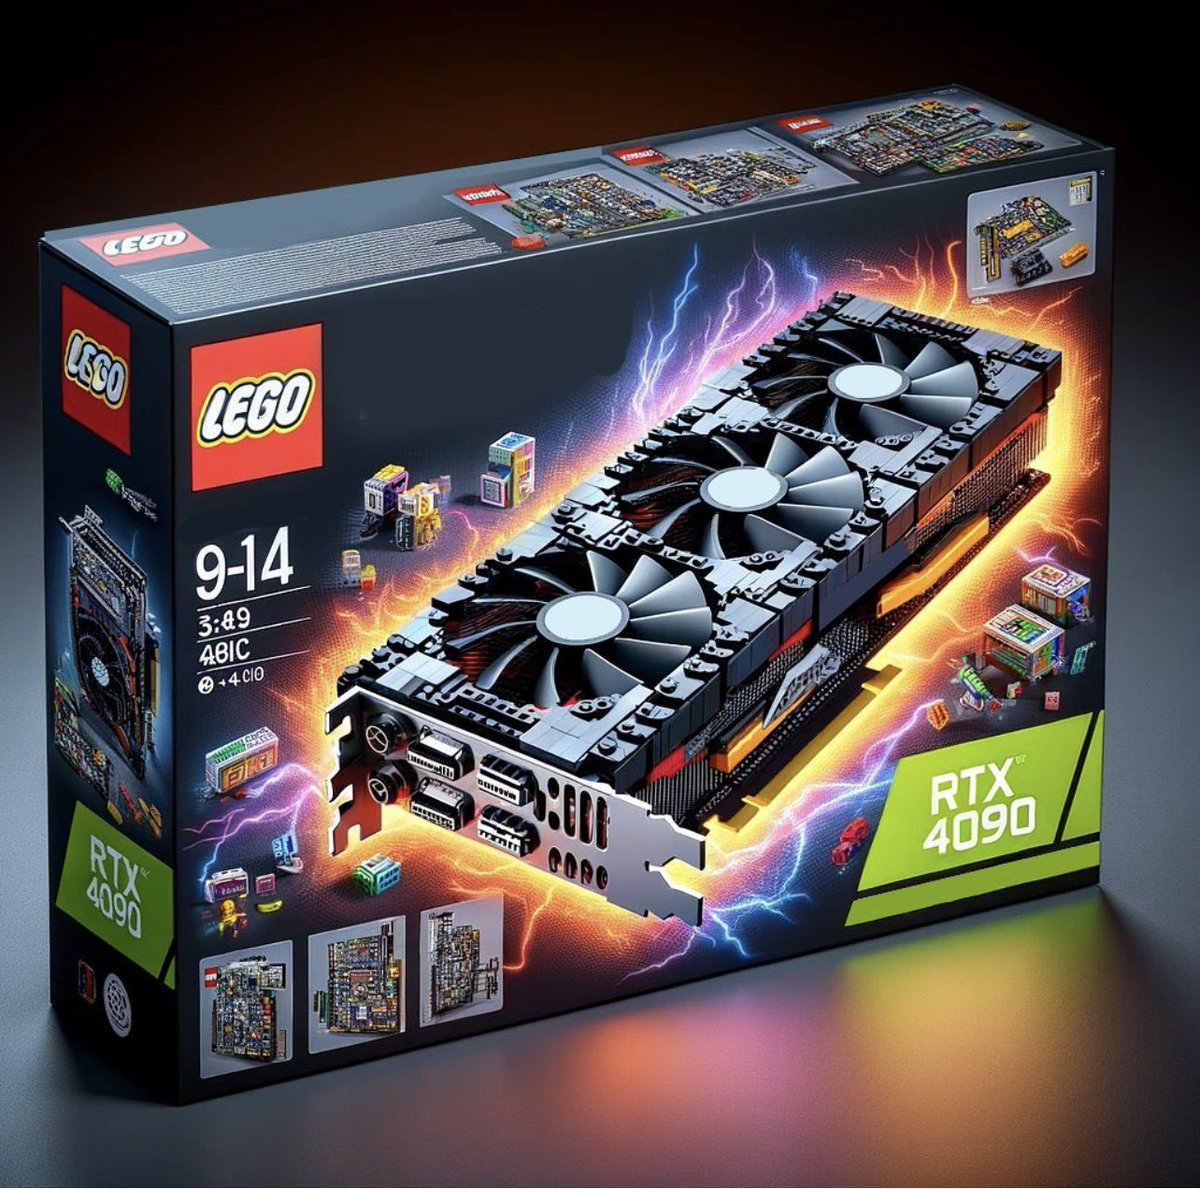 I hope LEGO GPU to become a reality, and it will be an amazing toy for all ages. @LEGOIdeas